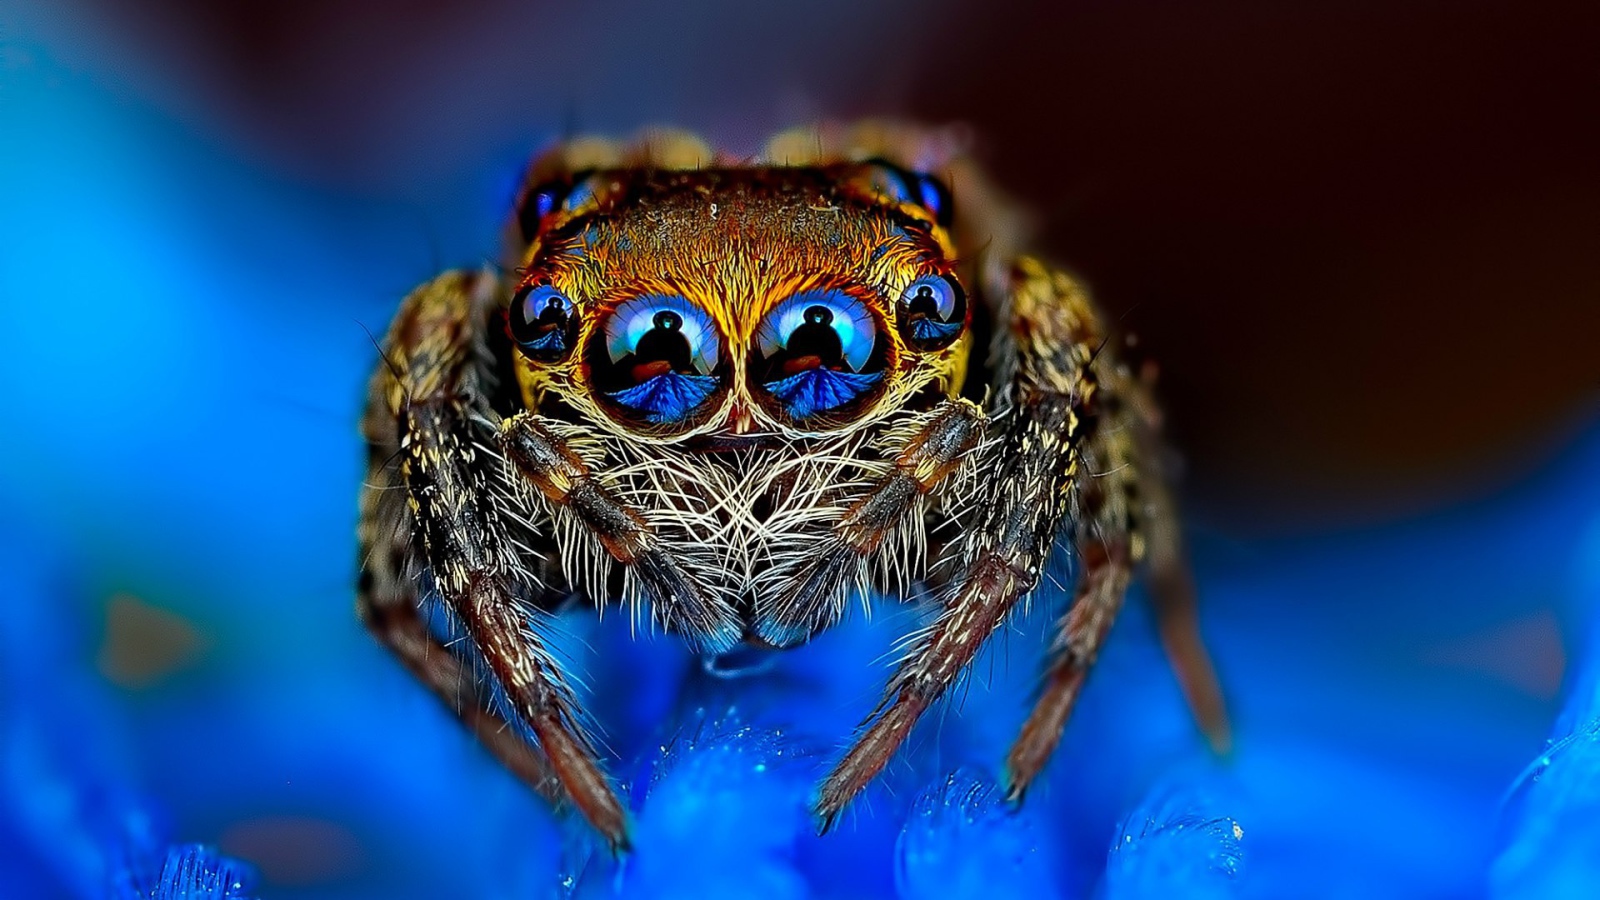 Reflected in the eyes of the spider